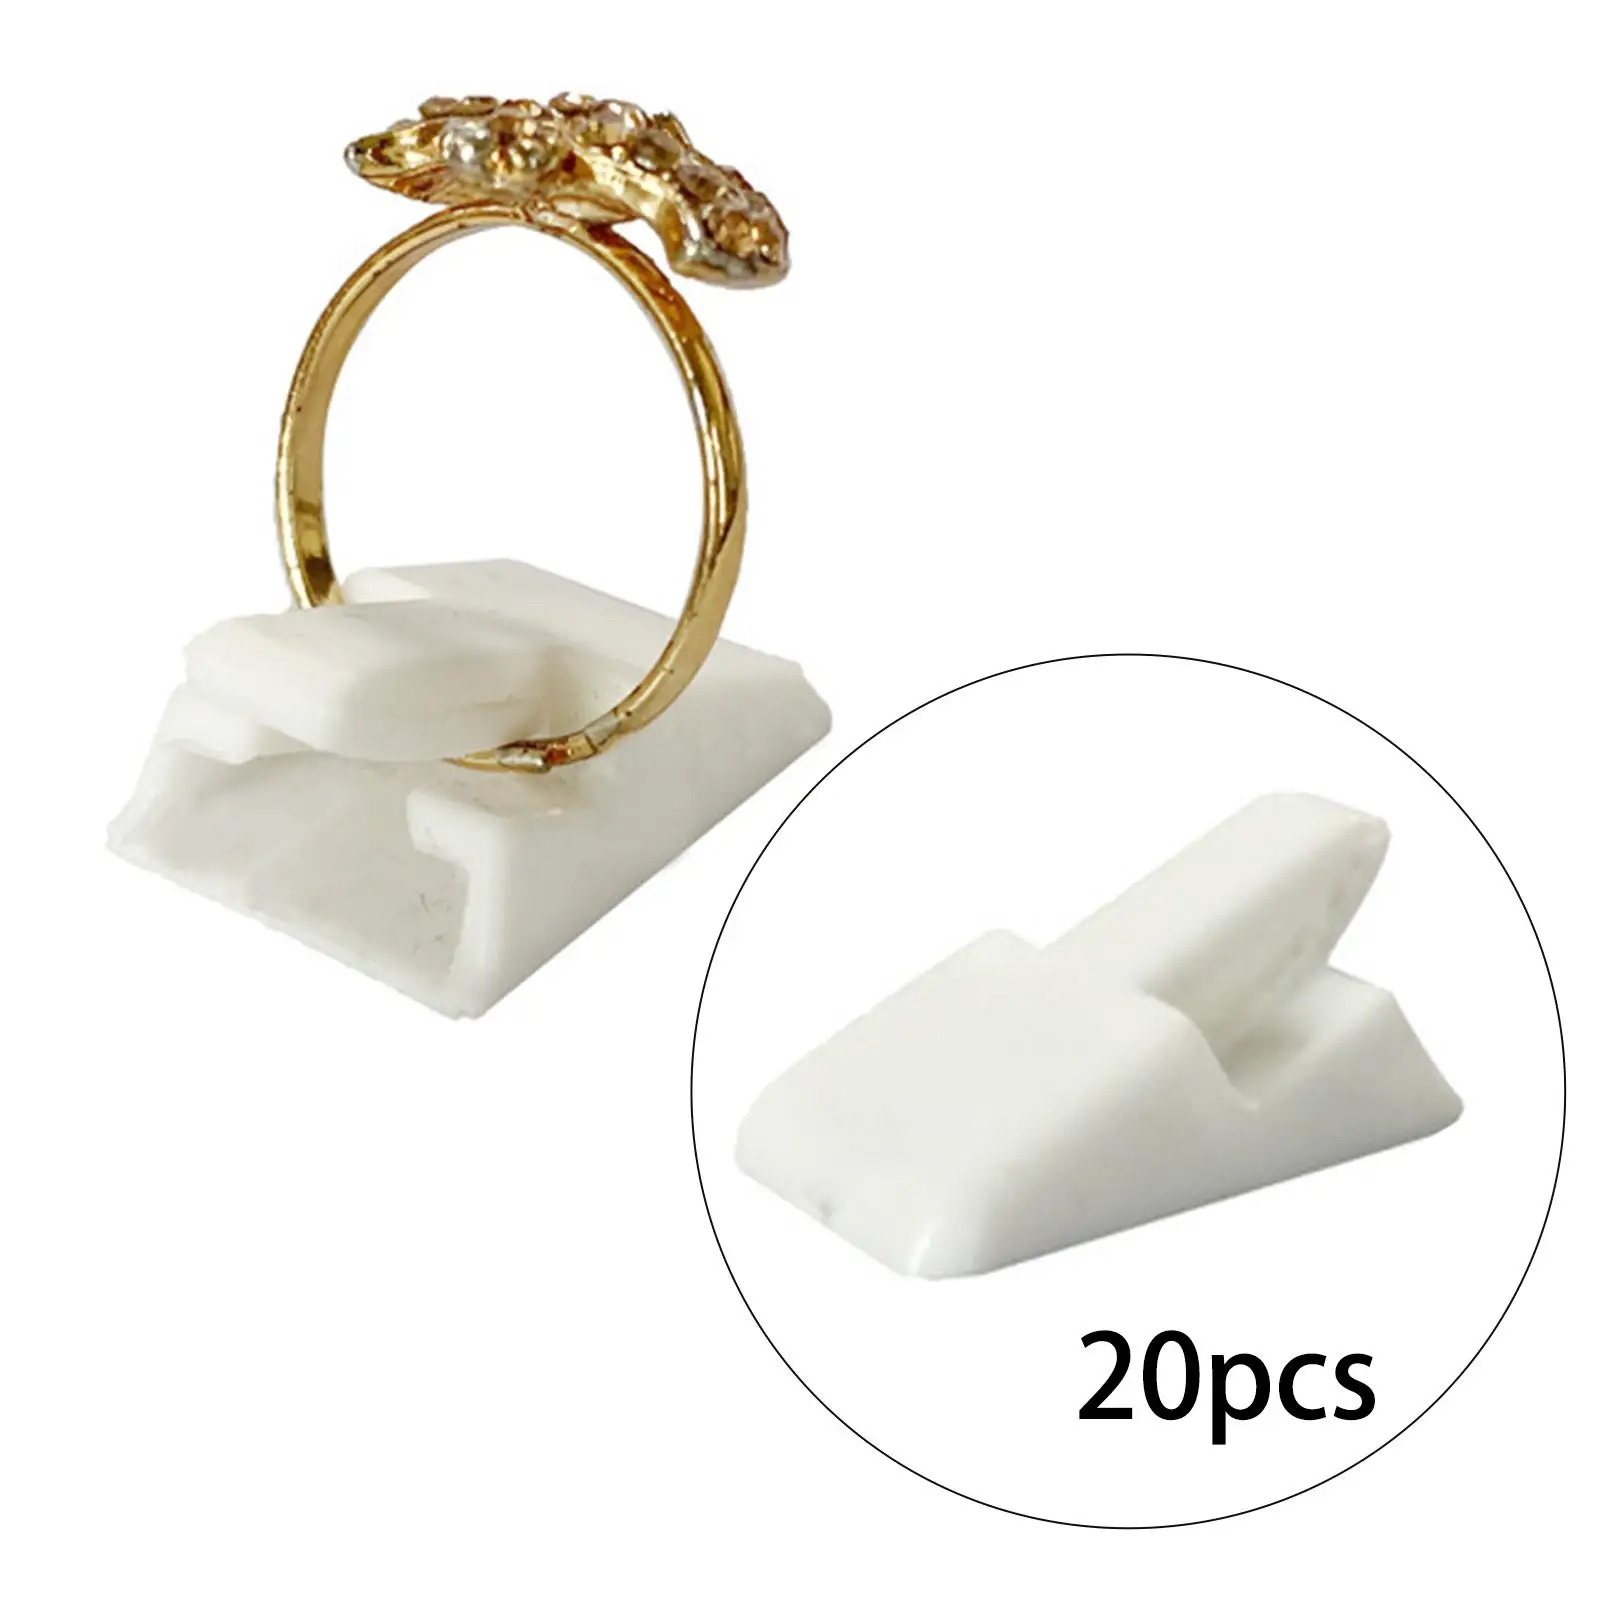 20 Pieces Ring Holder Jewelry Ring Decorative Organiser Ring Clip Stand Lightweight Jewellery Holder Rack Display Stand Showcase